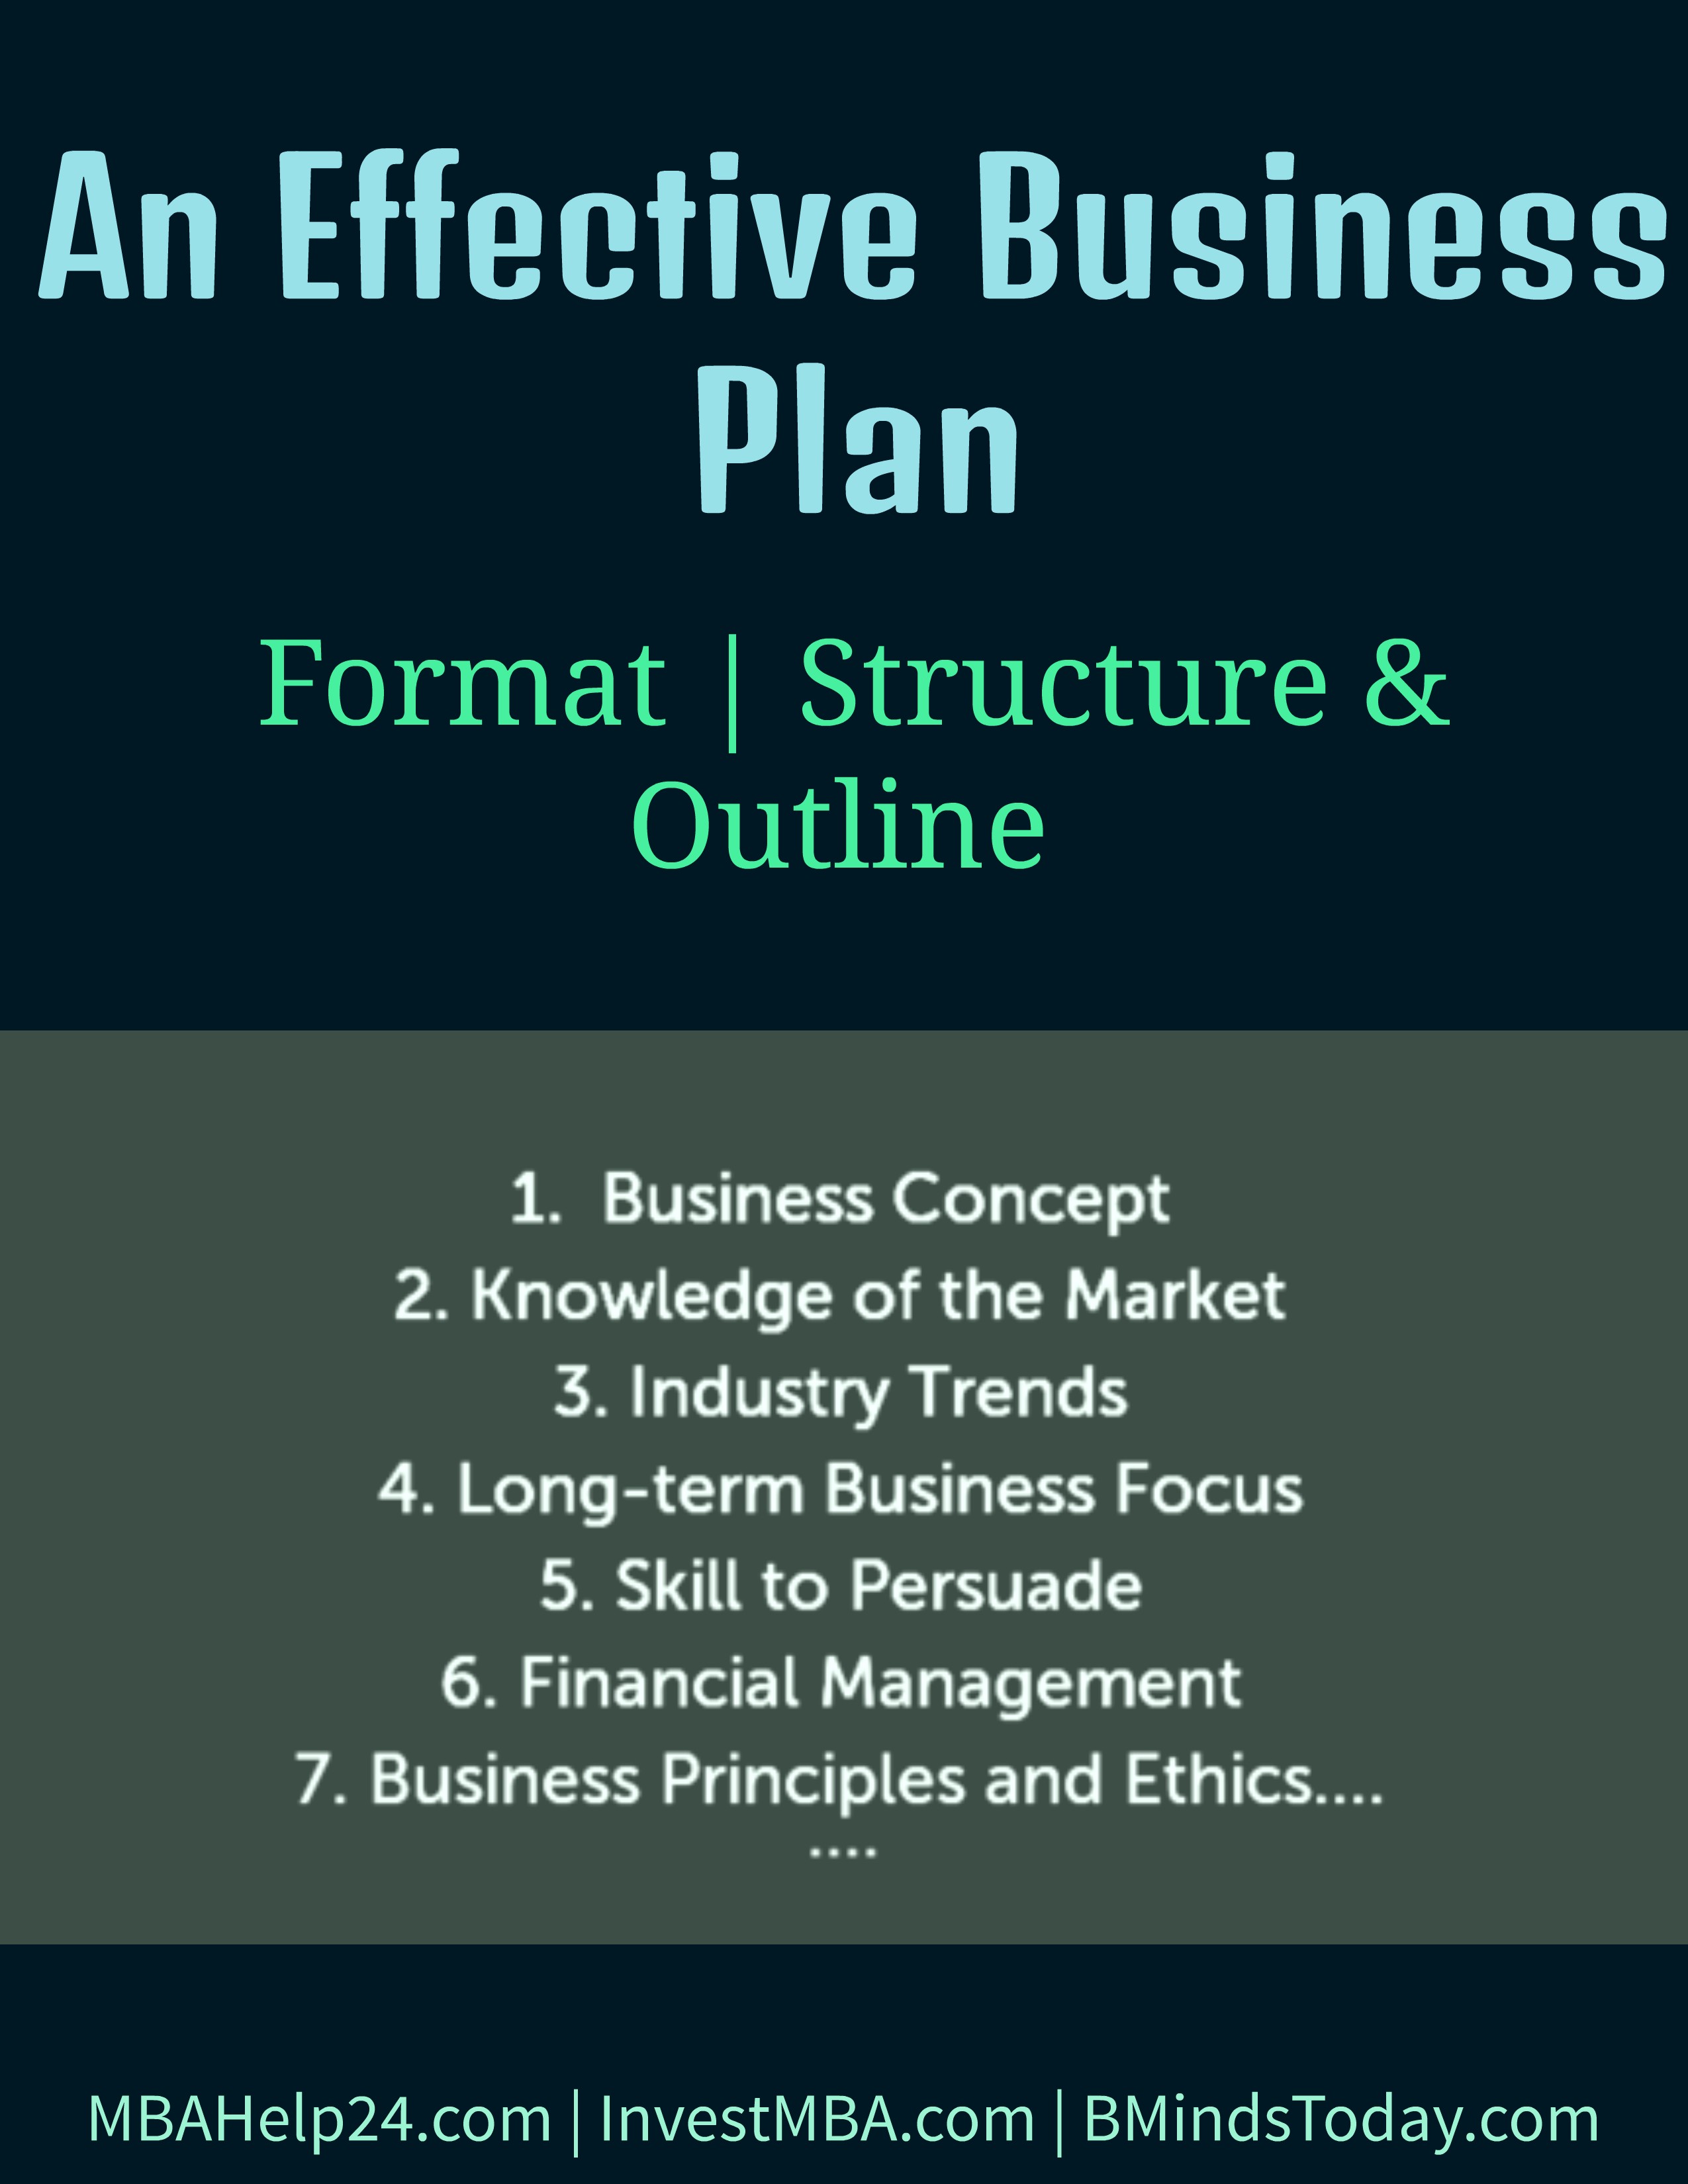 An Effective Business Plan | Format | Structure | Outline business plan An Effective Business Plan: Format, Structure &#038; Outline an effective business plan Structure and Outline An Effective Business Plan including Format, Structure and Outline An Effective Business Plan including Format, Structure and Outline an effective business plan Structure and Outline